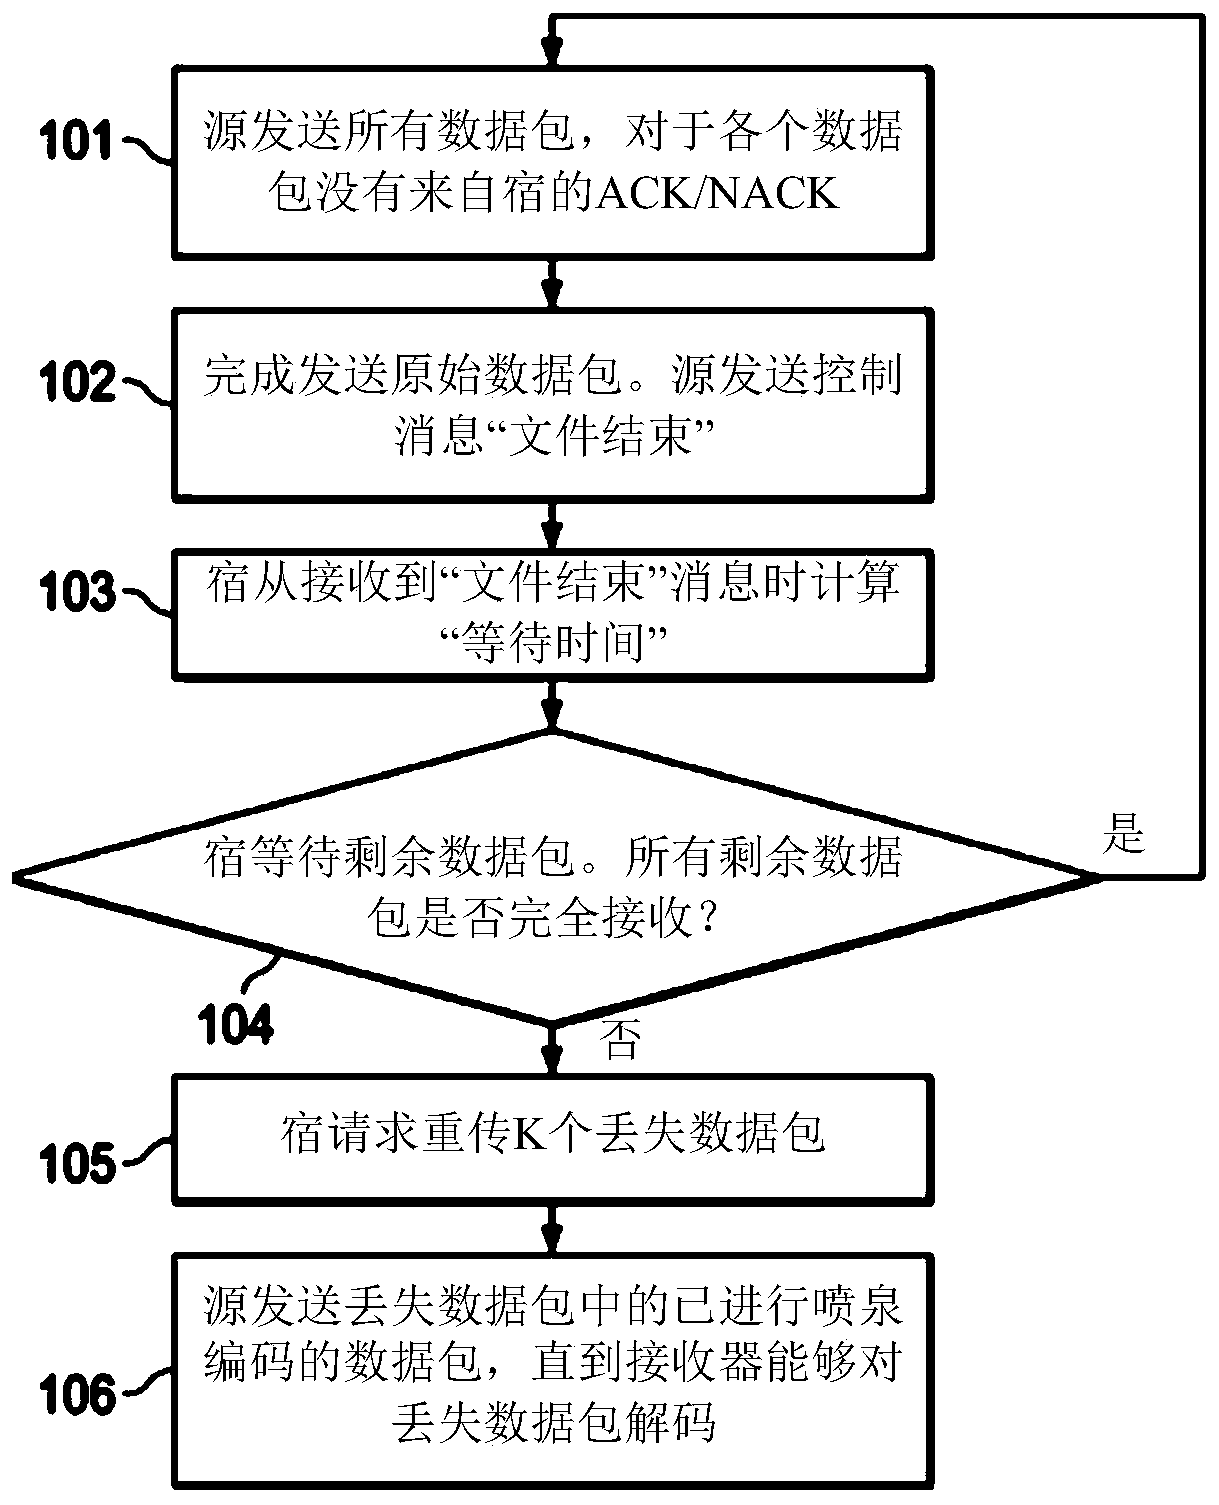 Method and system for on-demand file repair